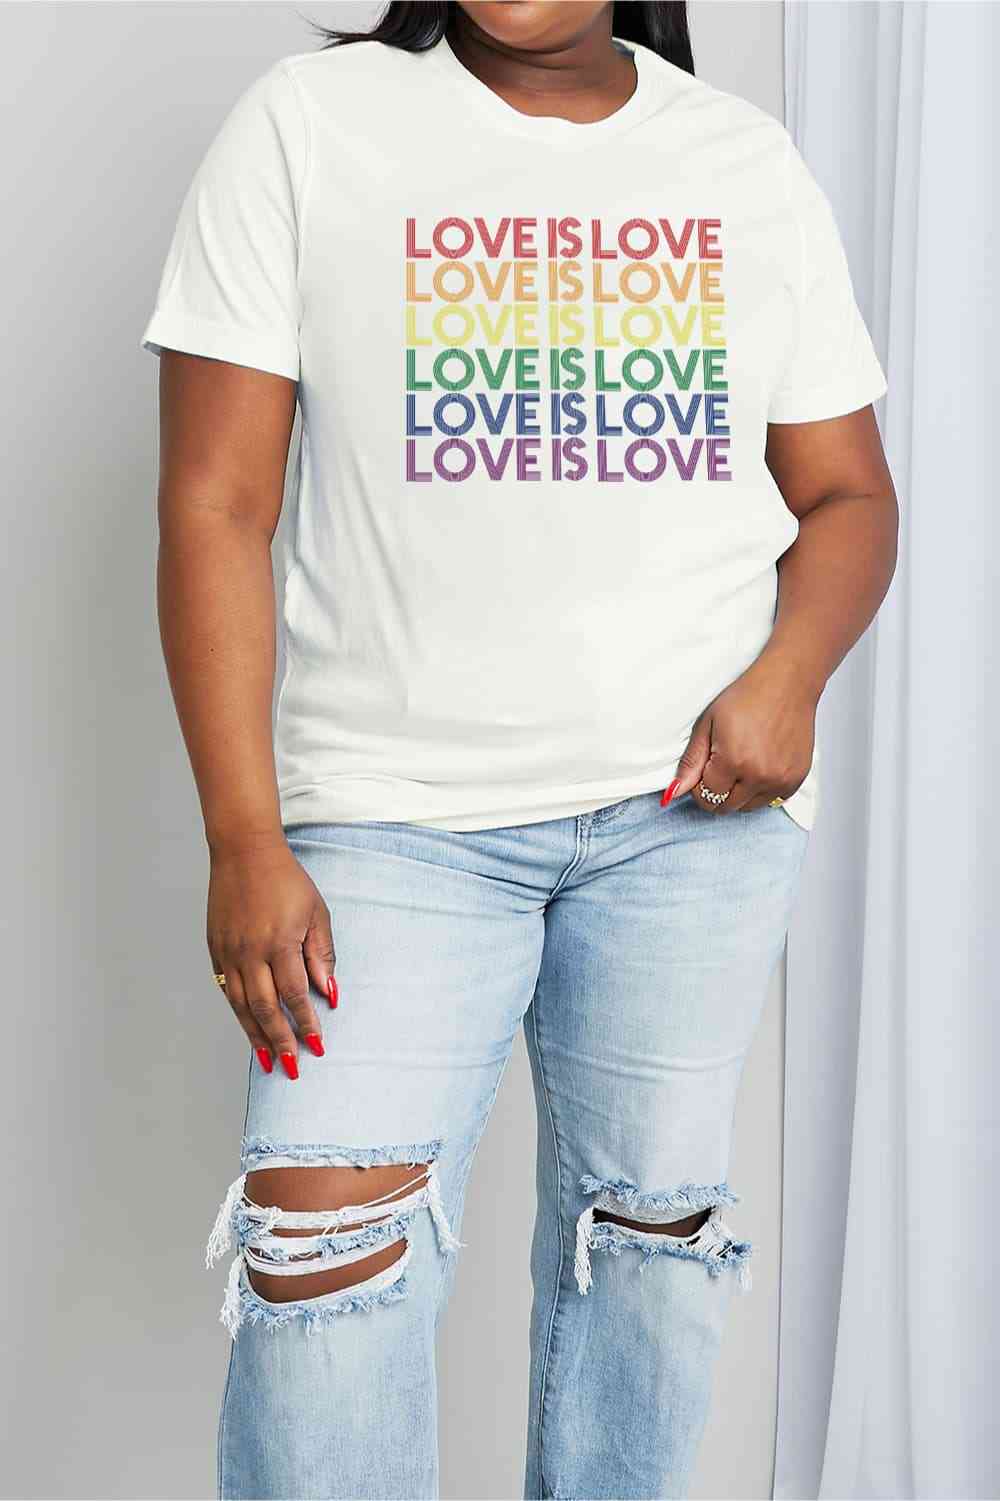 Simply Love Full Size LOVE IS LOVE Graphic Cotton Tee